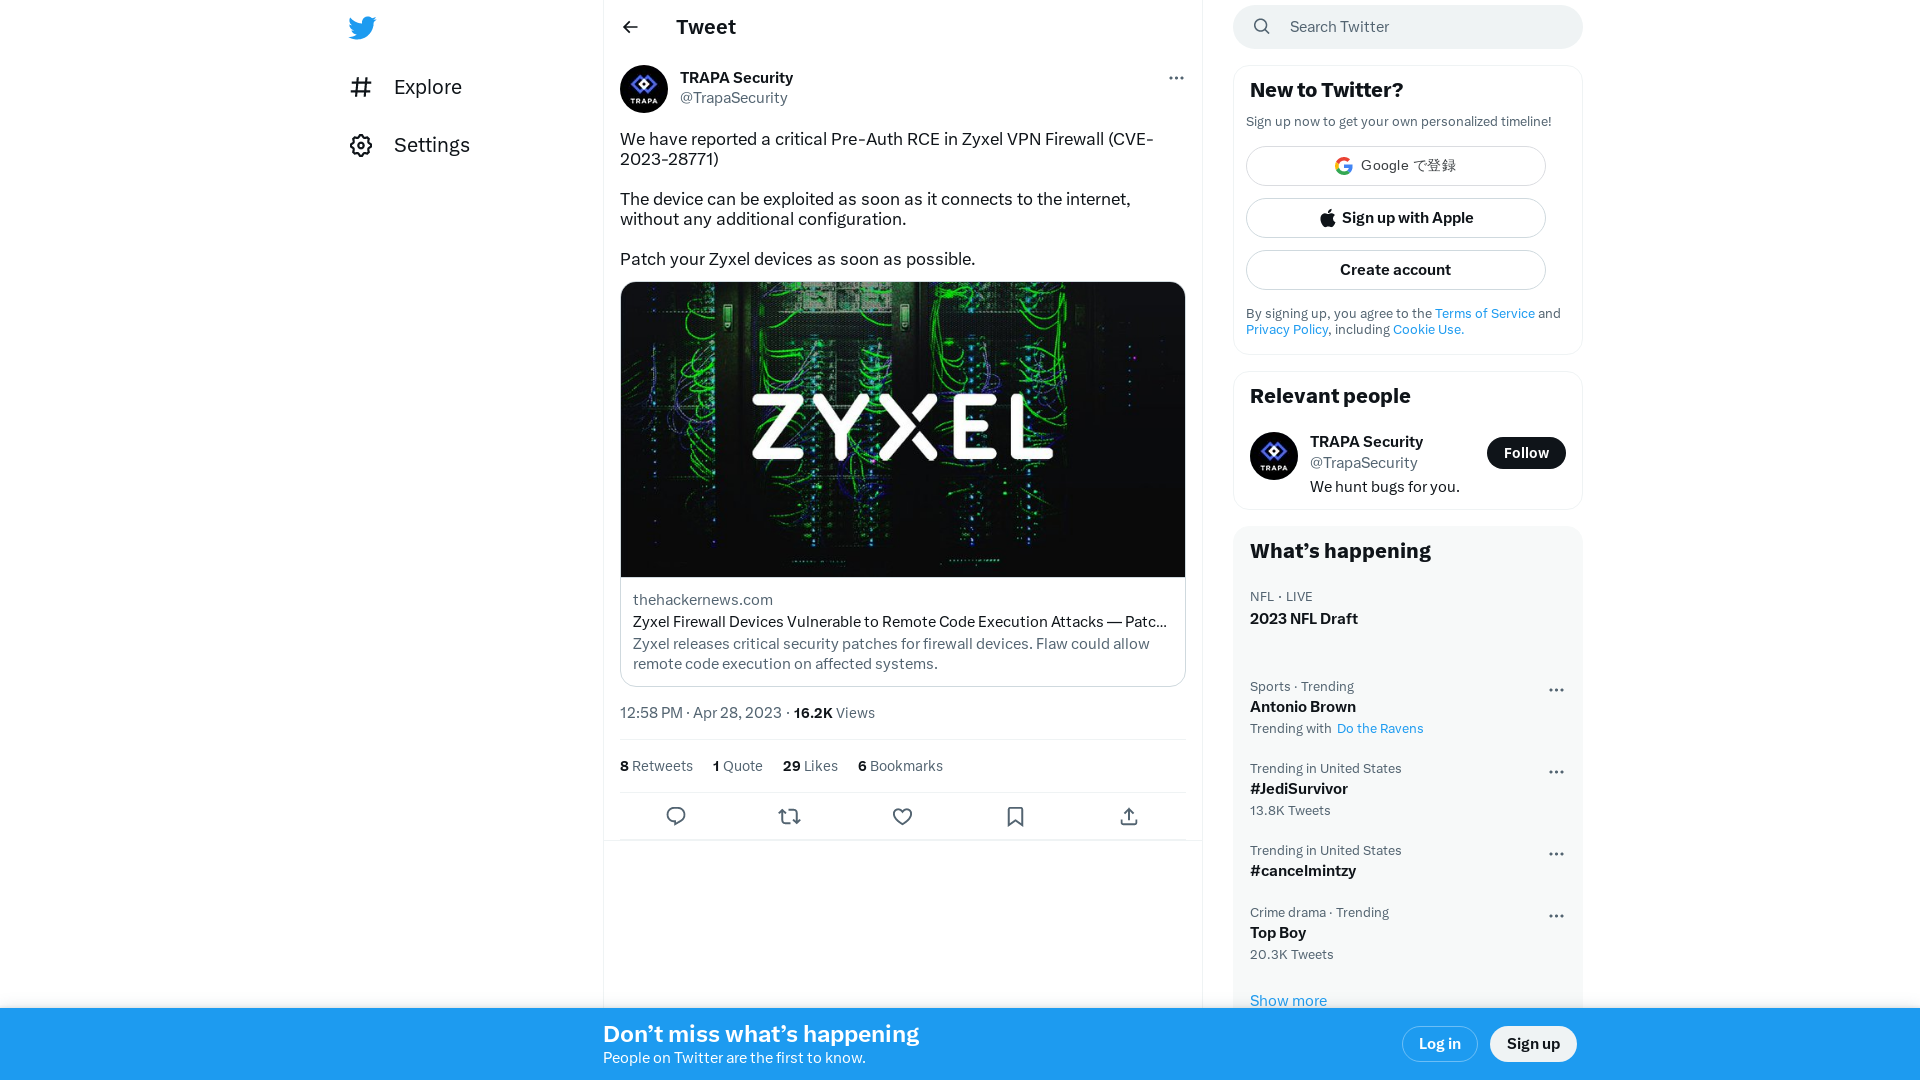 TRAPA Security on Twitter: "We have reported a critical Pre-Auth RCE in Zyxel VPN Firewall (CVE-2023-28771) The device can be exploited as soon as it connects to the internet, without any additional configuration. Patch your Zyxel devices as soon as possible. https://t.co/OYpMwg8Q6i" / Twitter